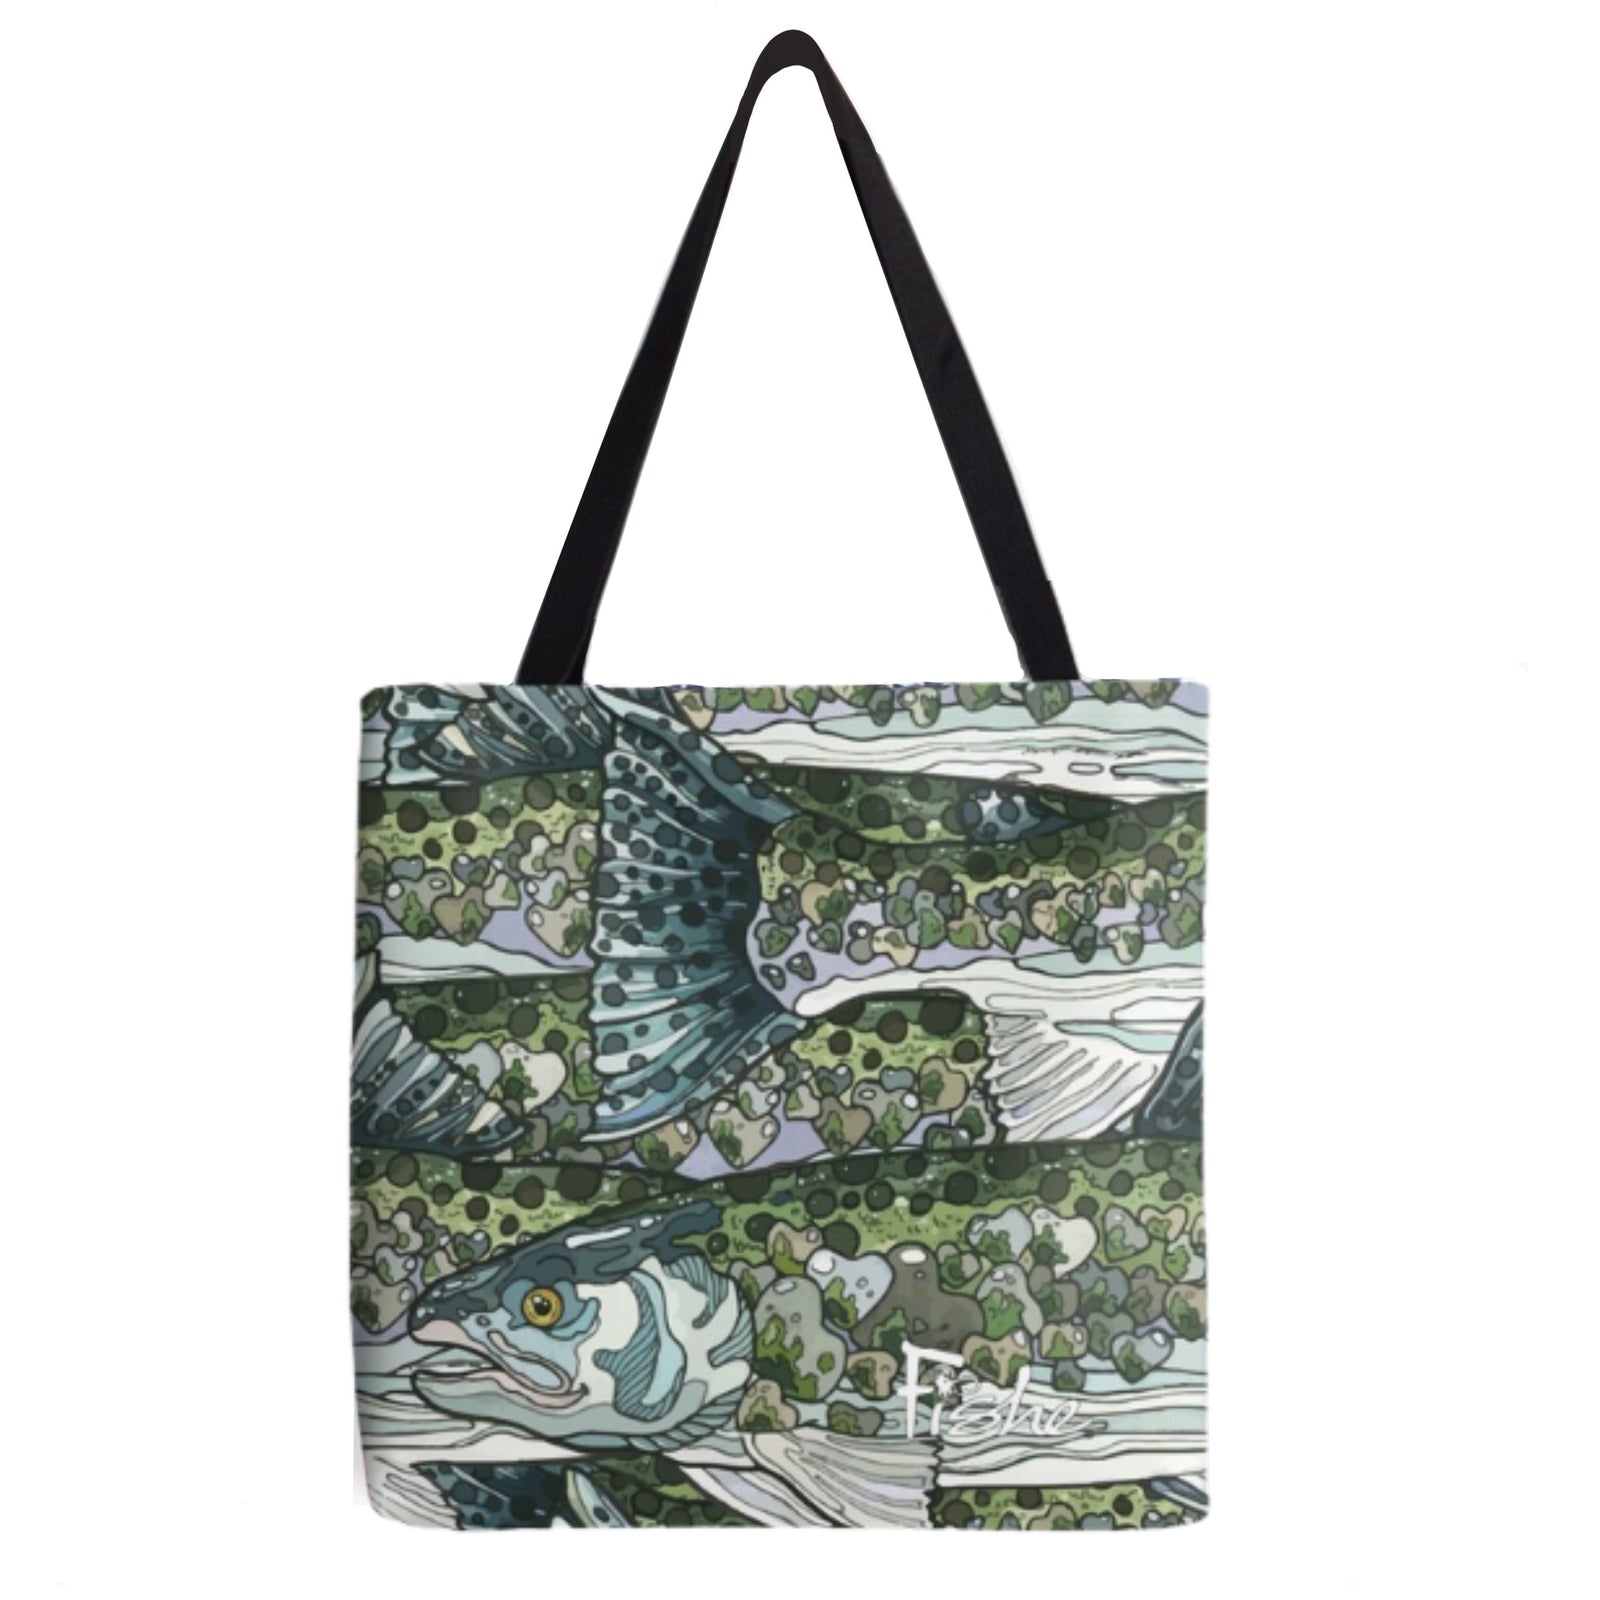 Stylish Canvas Totes for Travel & Adventure